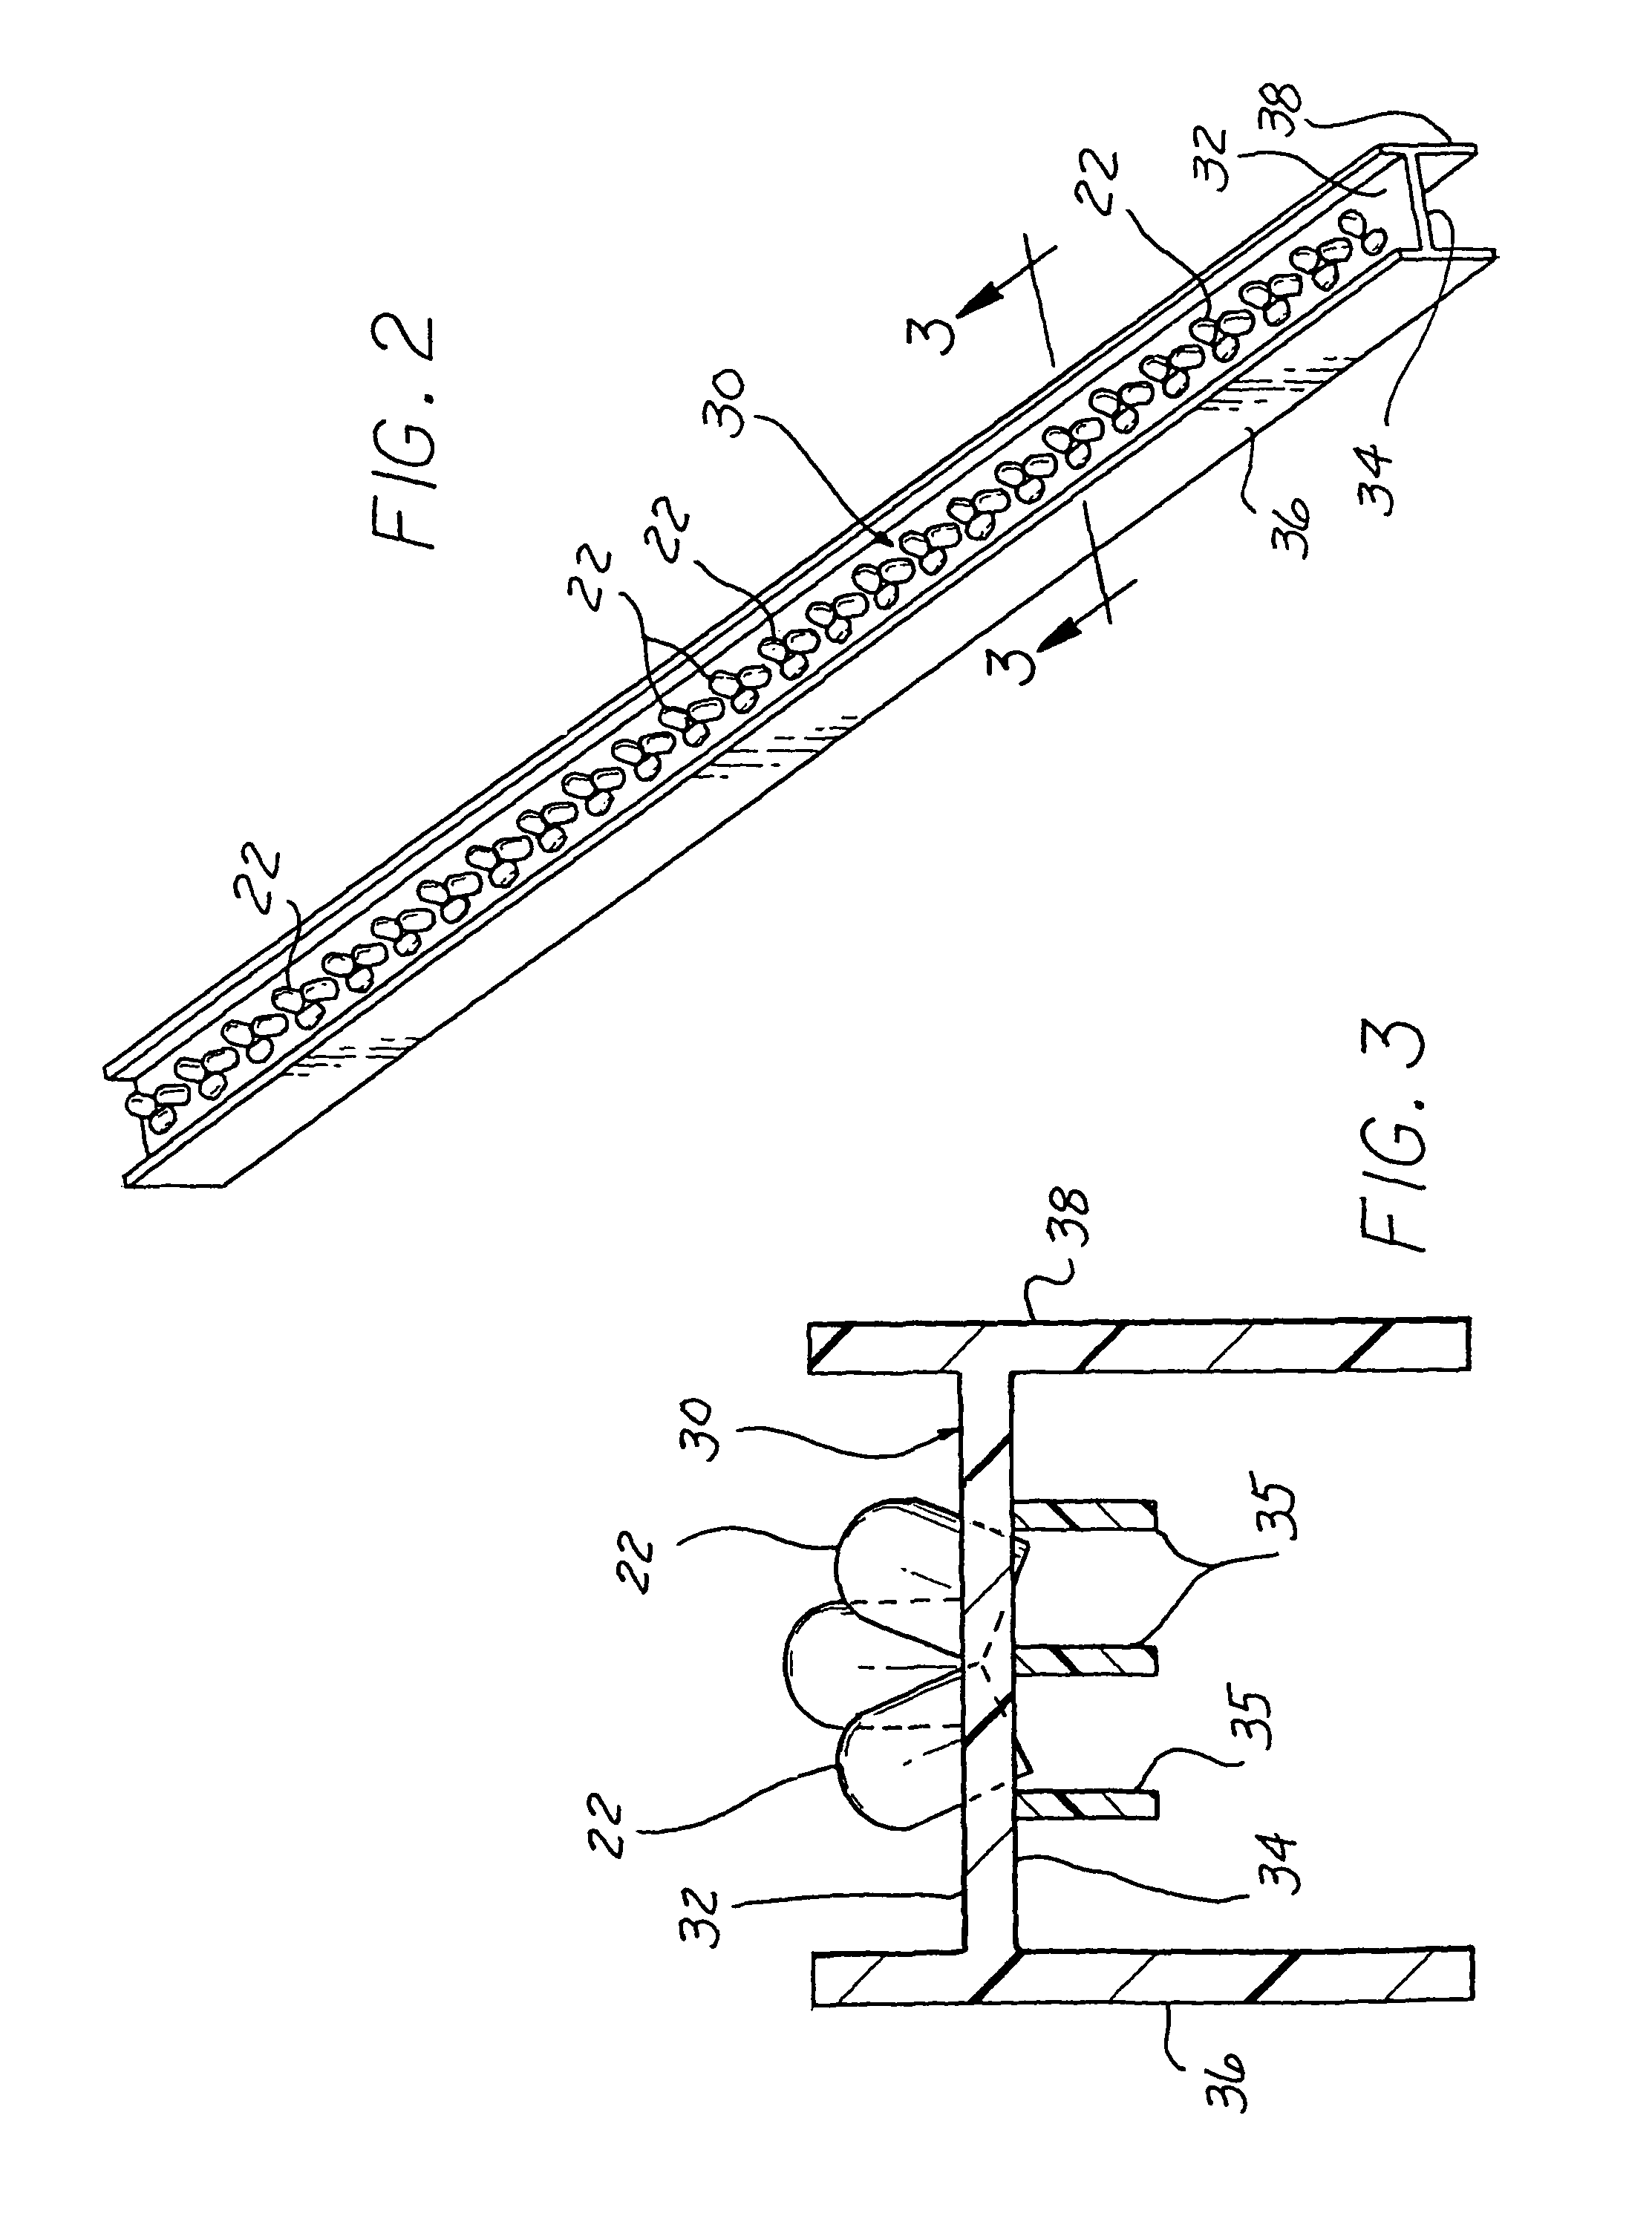 Light sources incorporating light emitting diodes